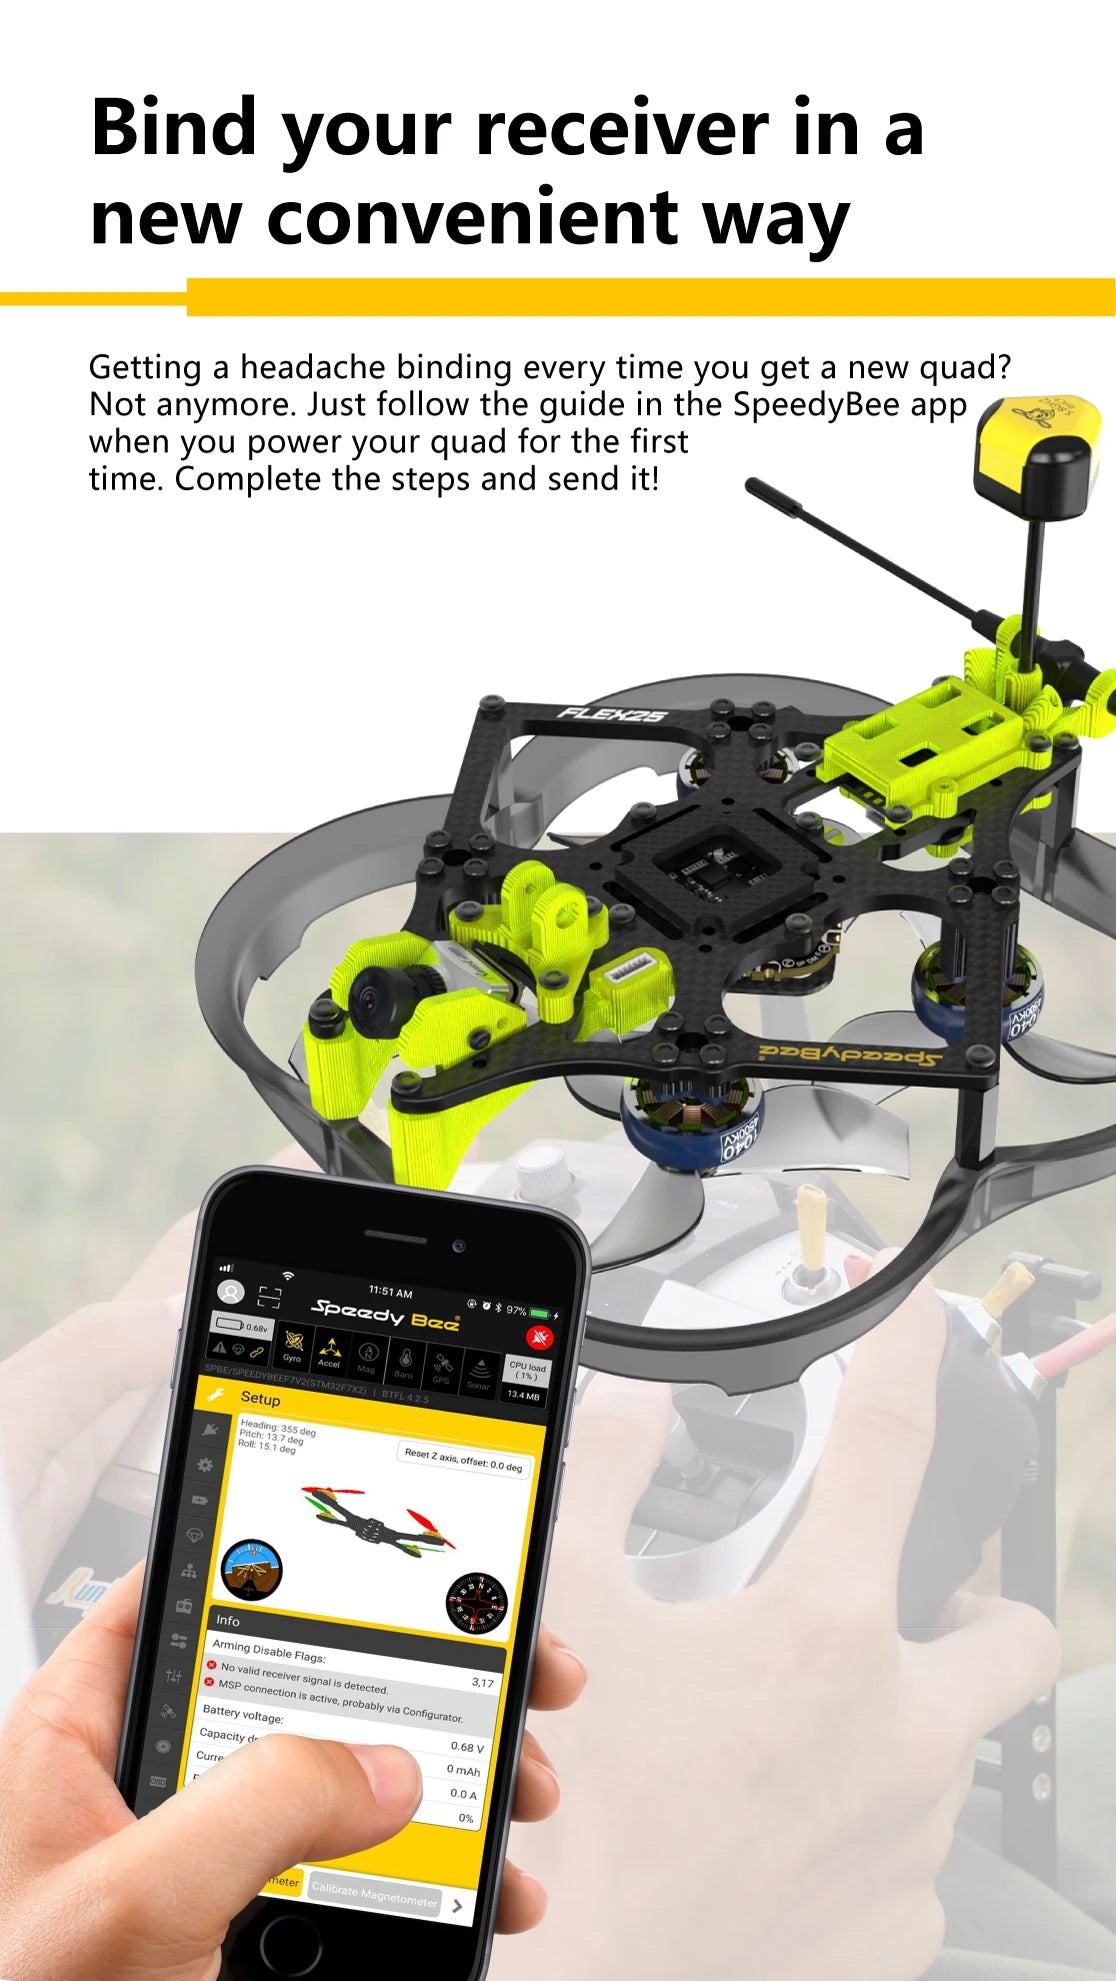 SpeedyBee F745 35A Freestyle FPV, follow the guide in the SpeedyBee app when powering your quad for the first time